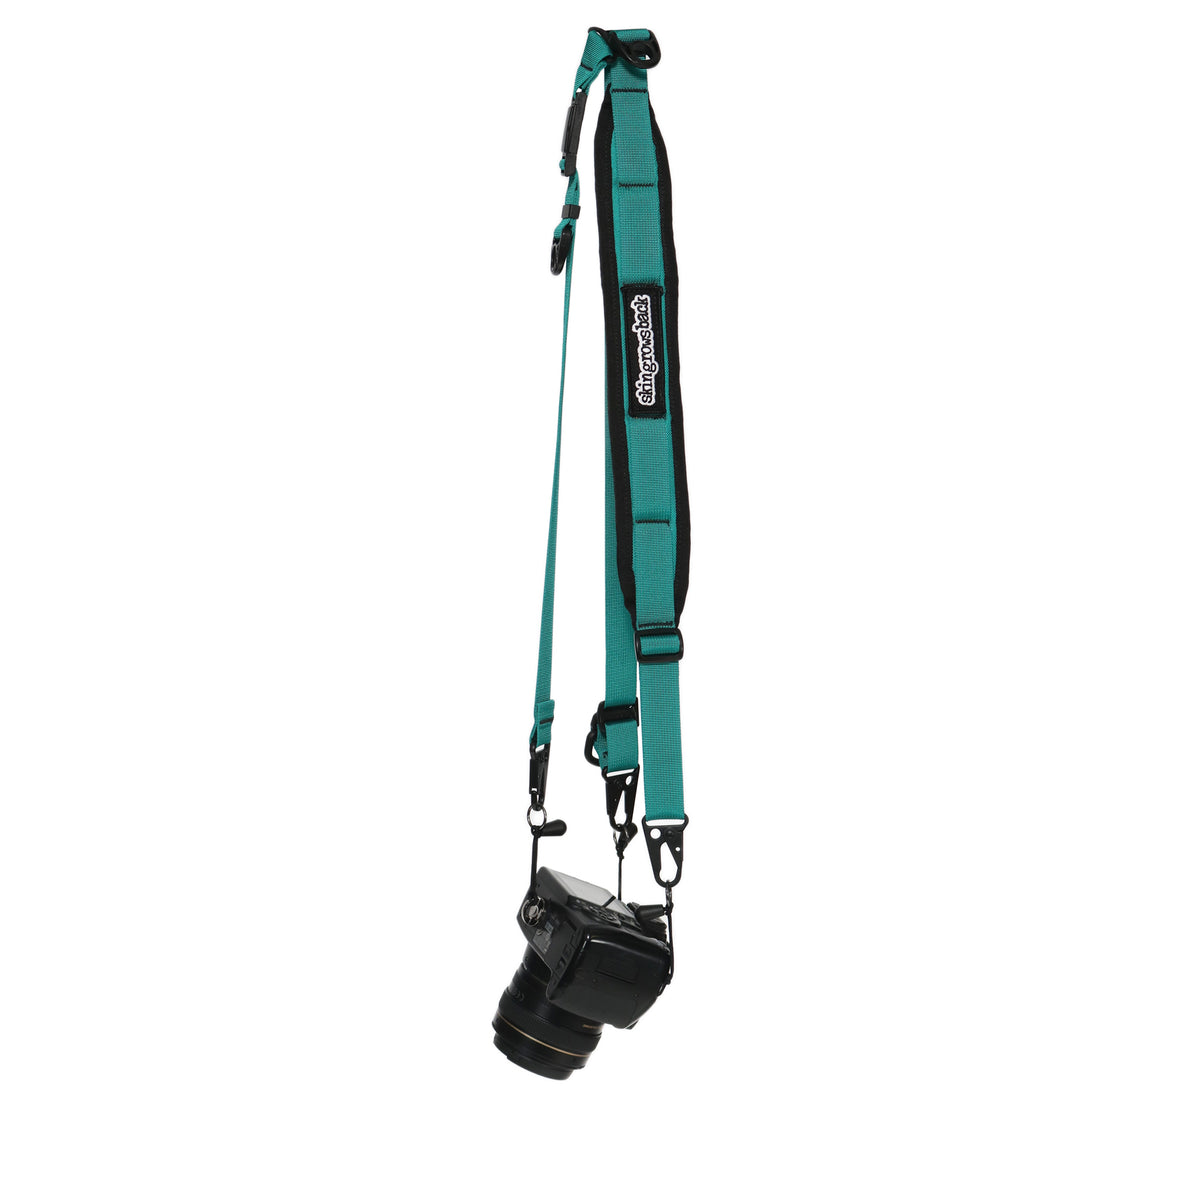 skingrowsback 3point cycling camera strap teal made in australia